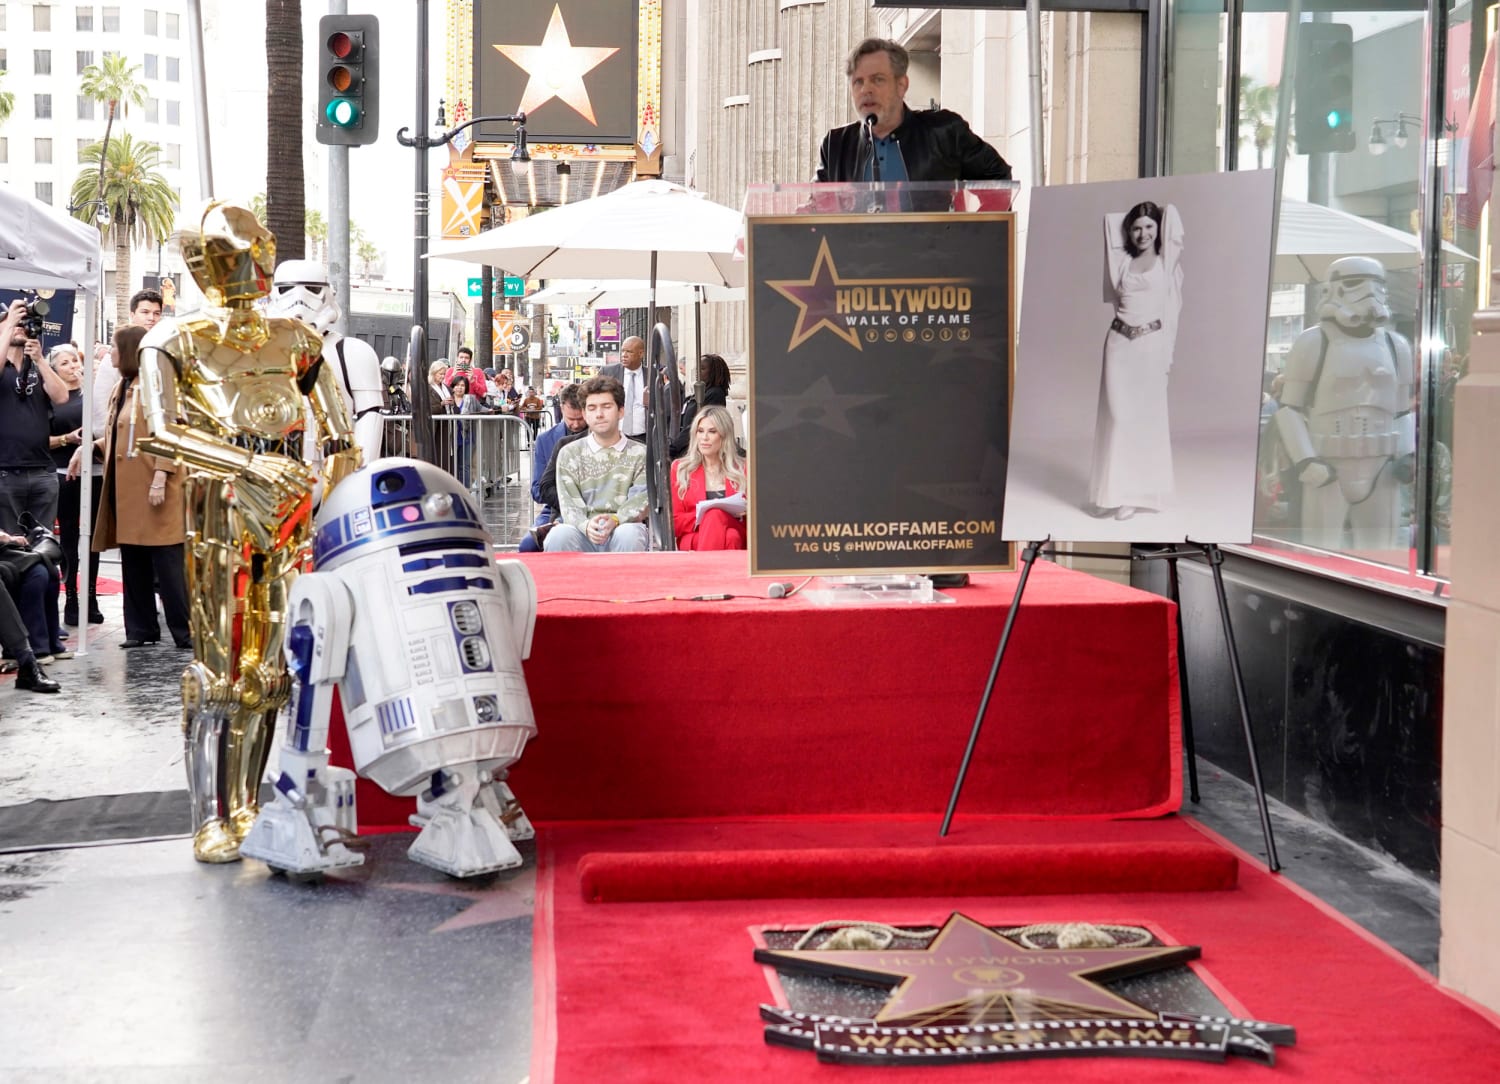 Carrie Fisher was honored with a star on the Walk of Fame on May 4th